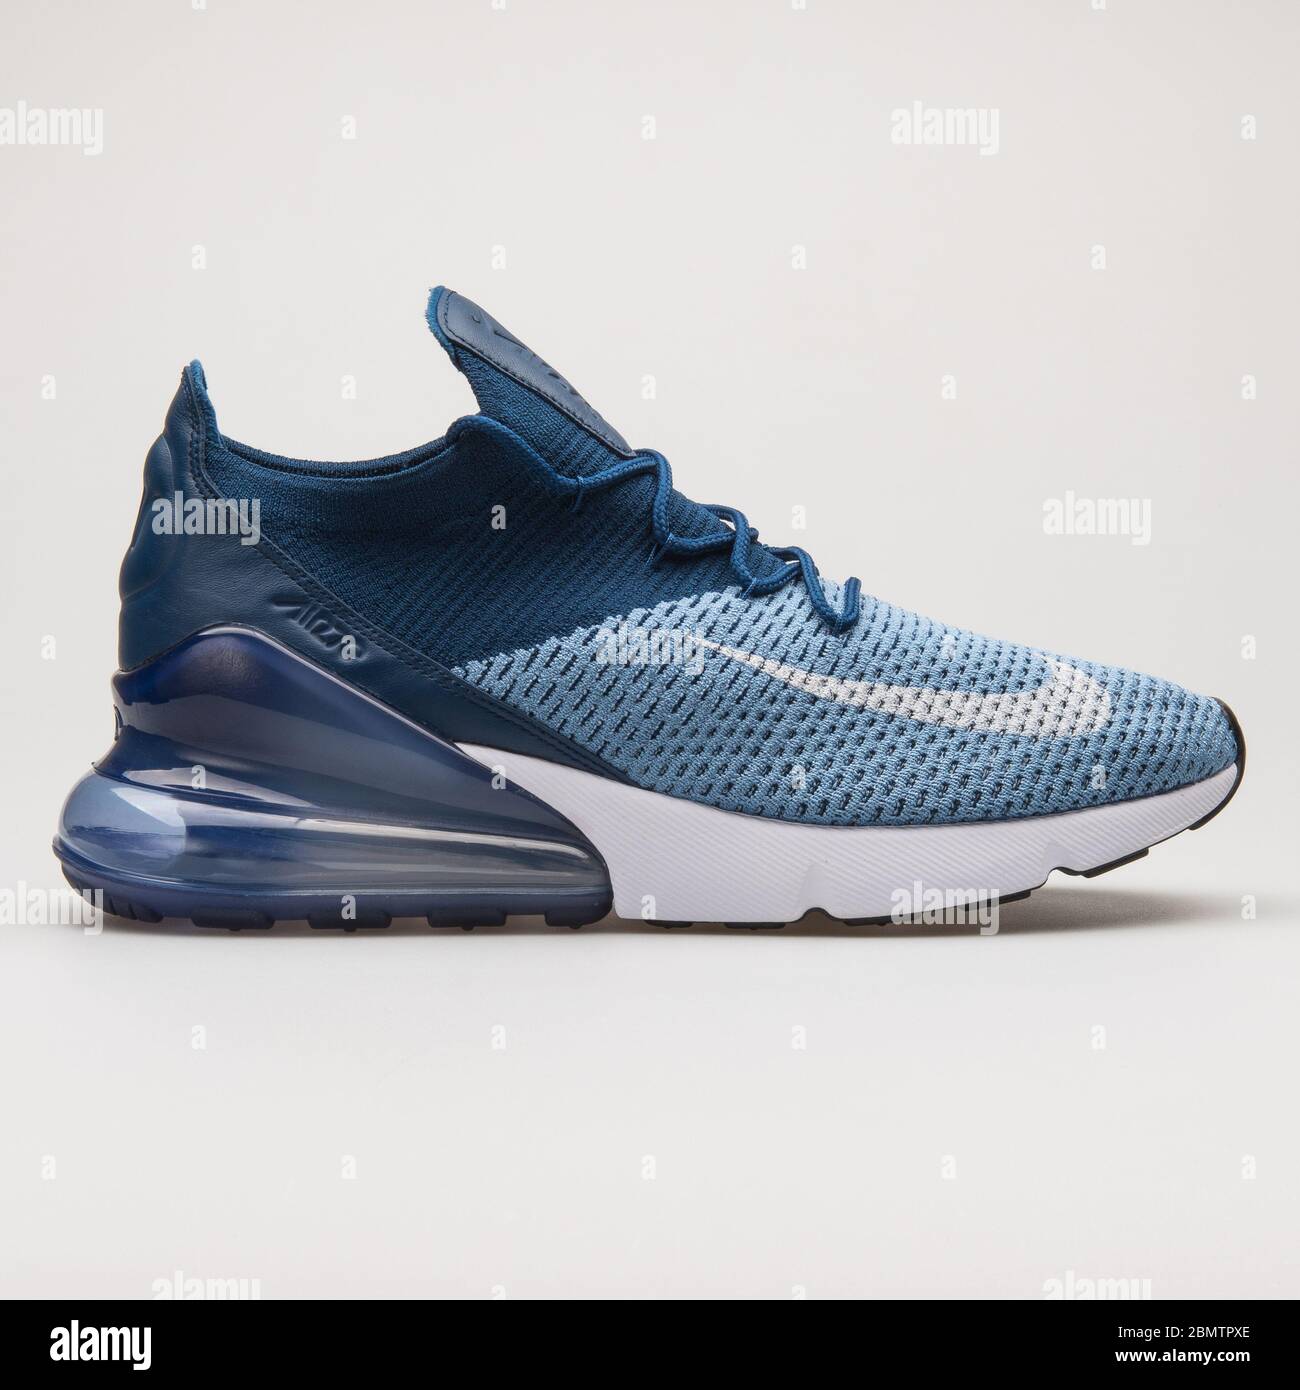 nike air max 27 flyknit release date